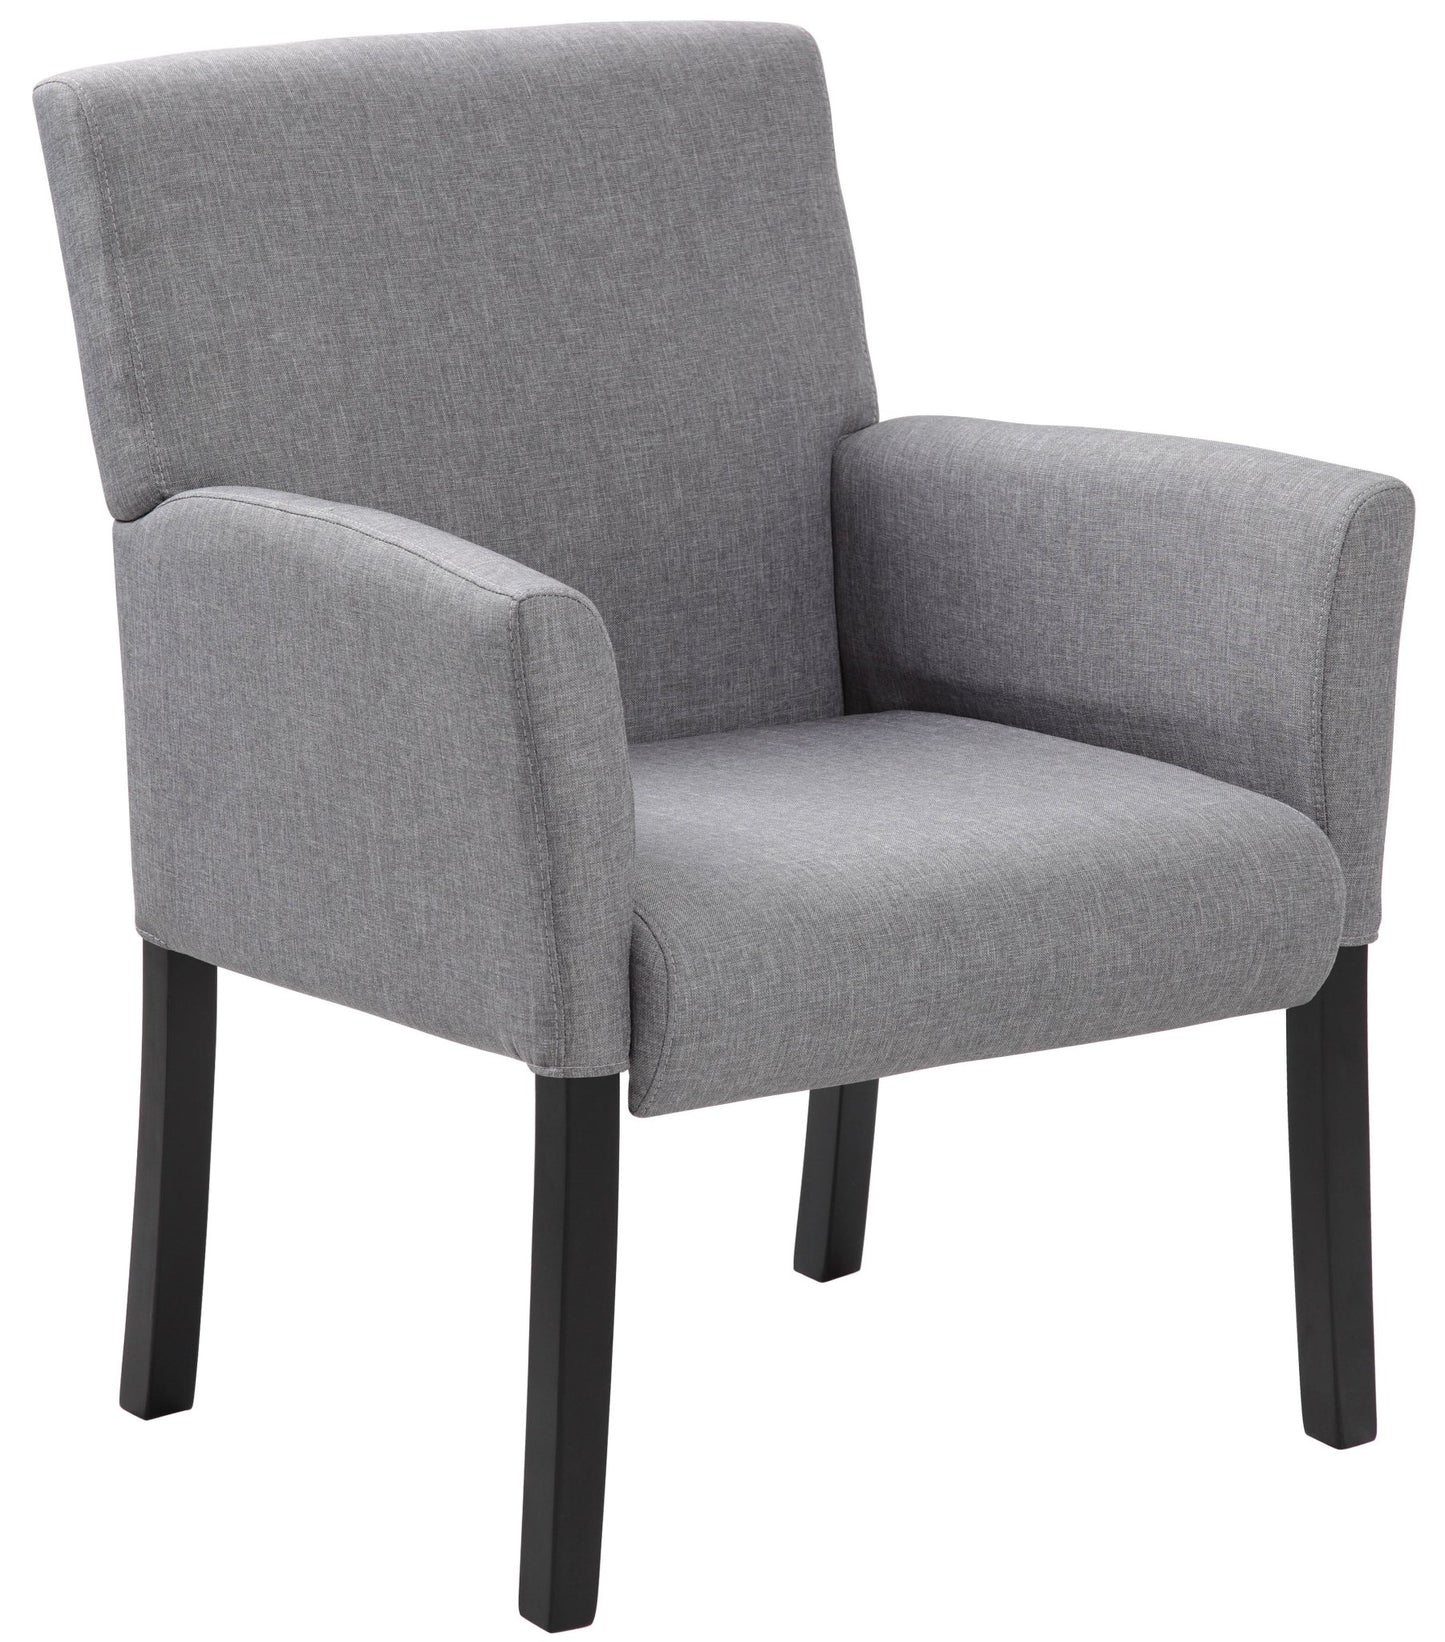 Boss Box Arm guest, accent or dining chair, Medium Grey (B659) - SchoolOutlet